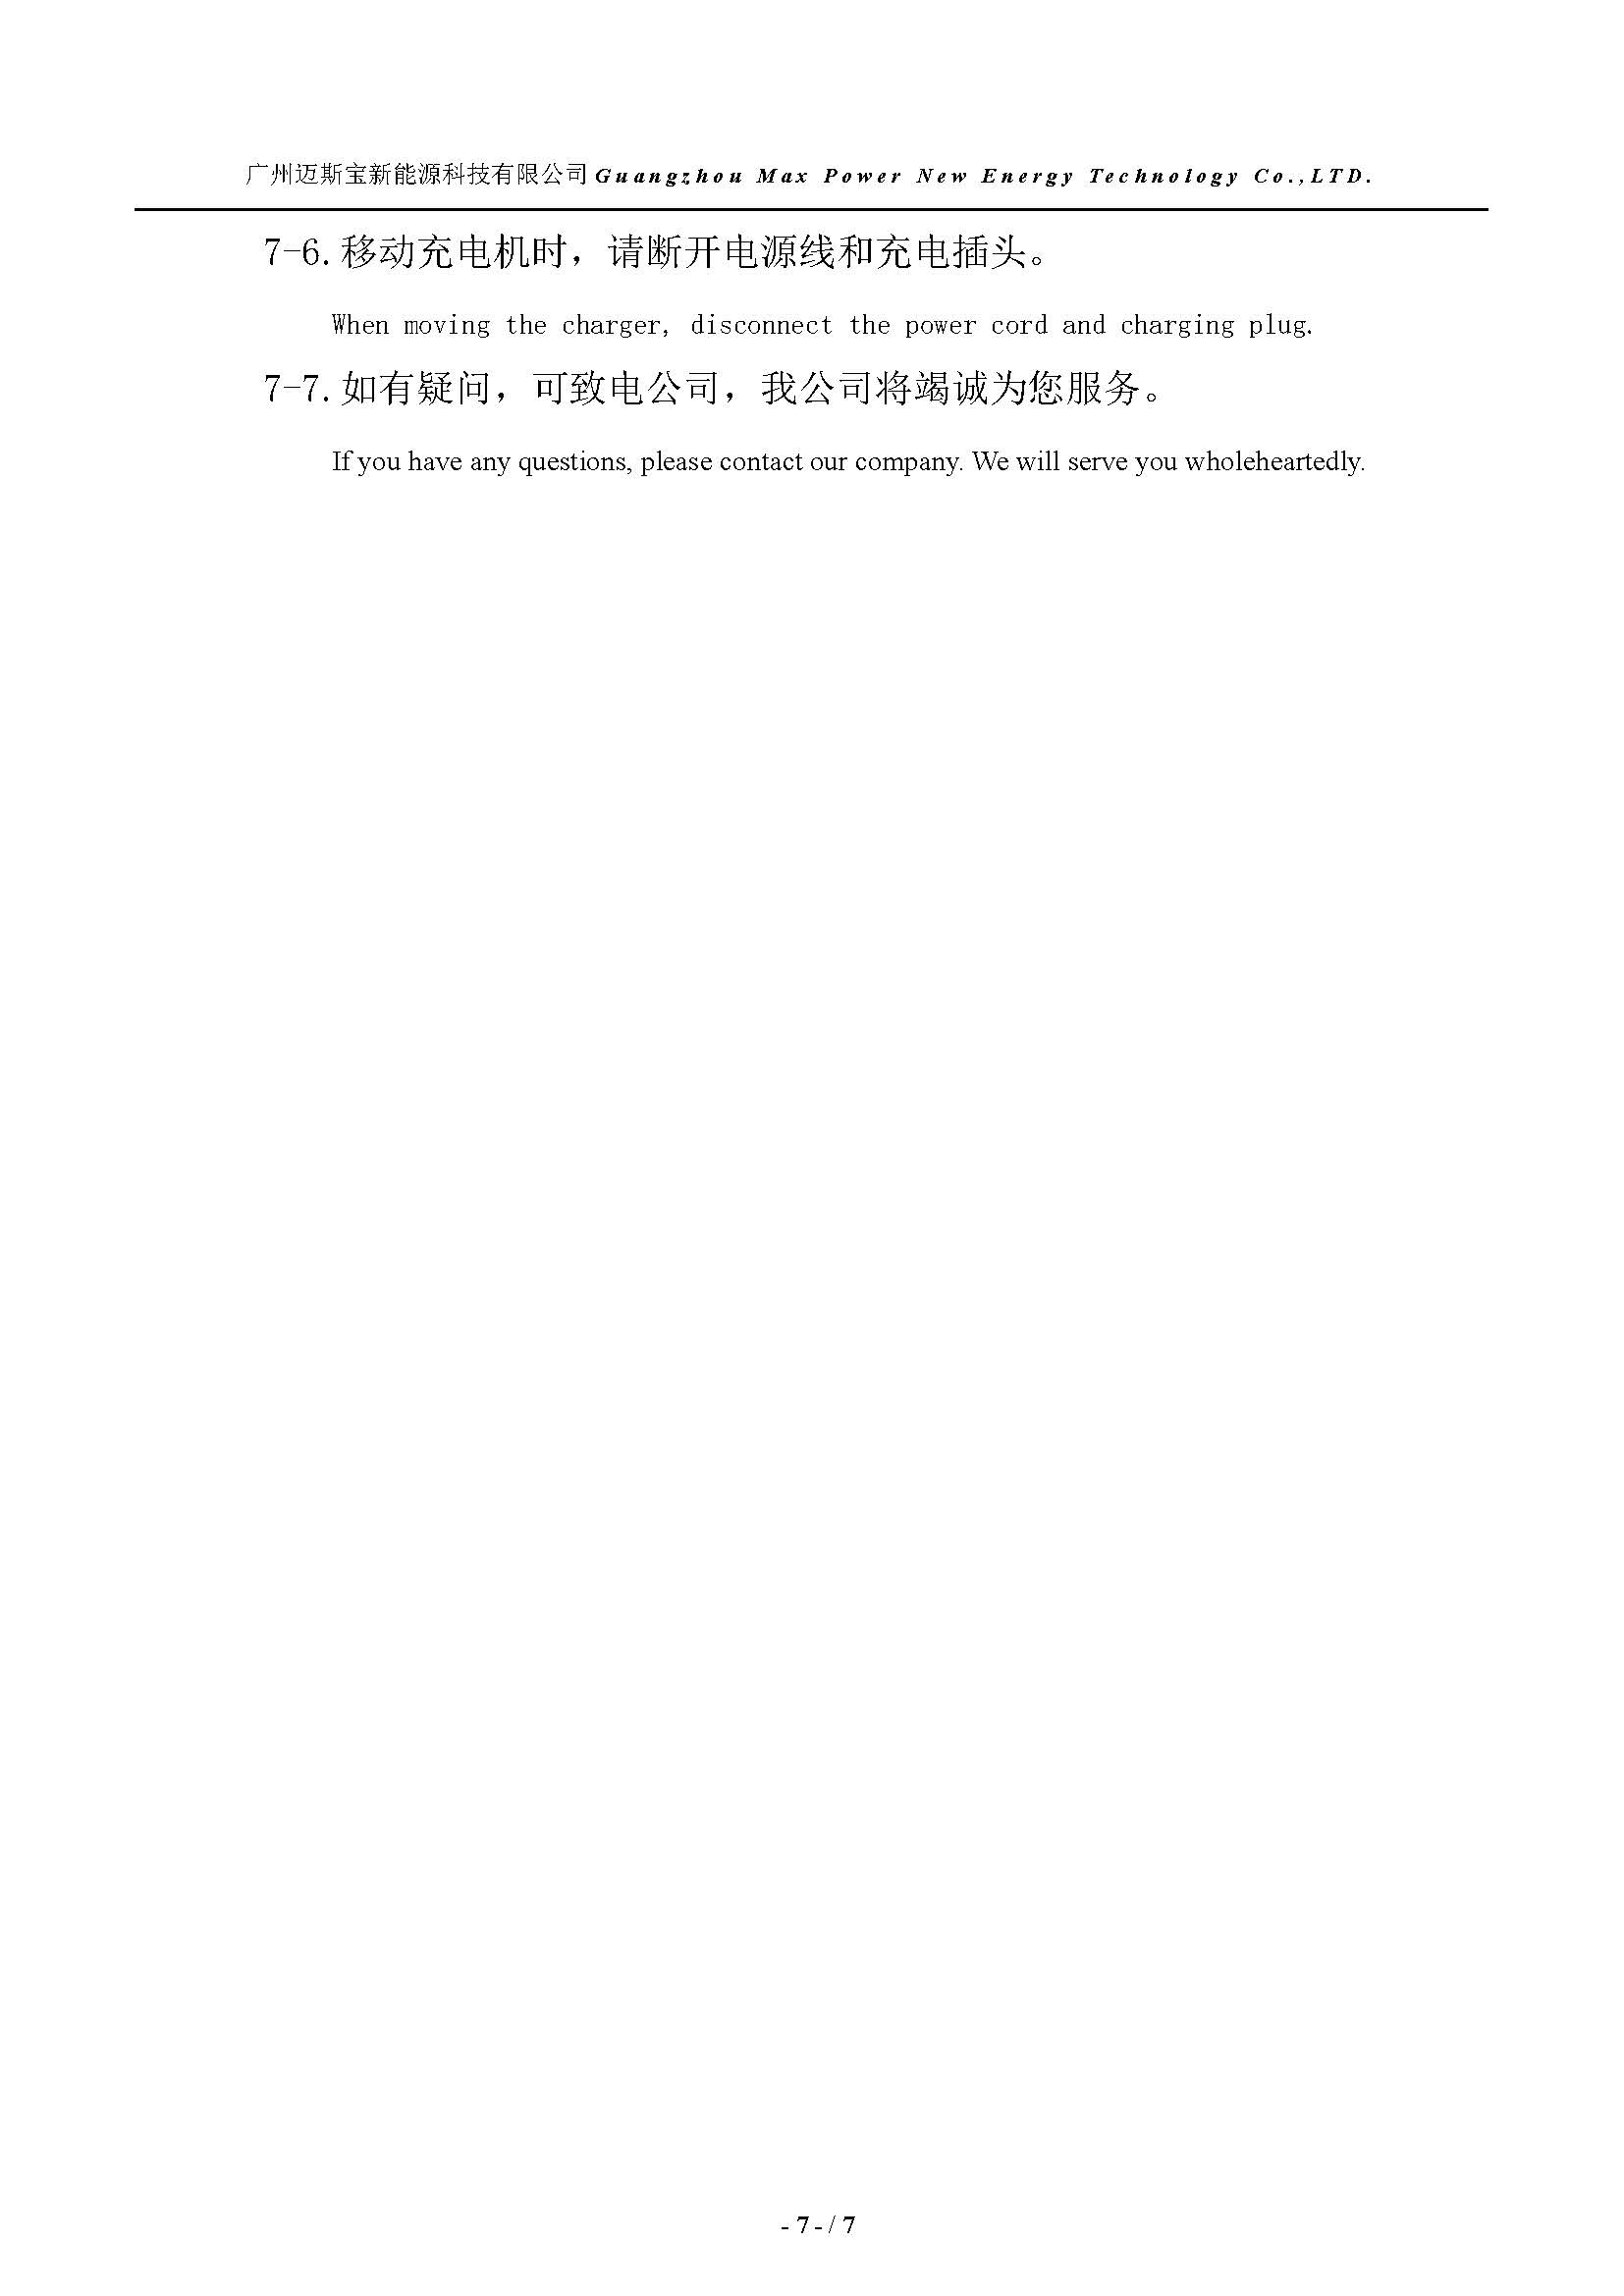 OBC4830_product specification_V1.0_0117_2021_页面_7.jpg